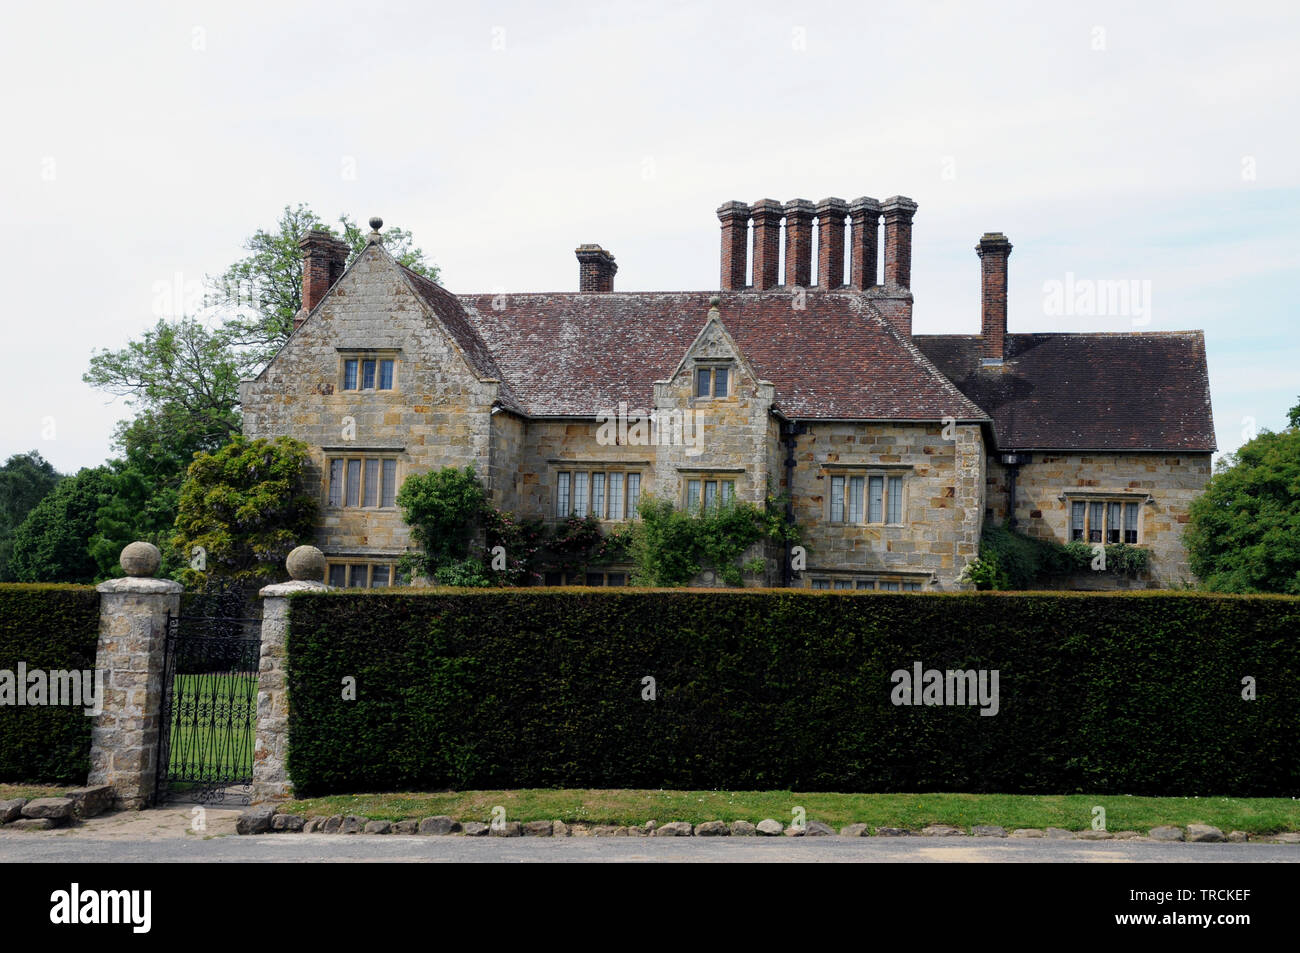 Batemans the home of Rudyard Kipling from 1902 to his death in 1936. The house is a Jacobean Wealden mansion and dates from 1634. Stock Photo